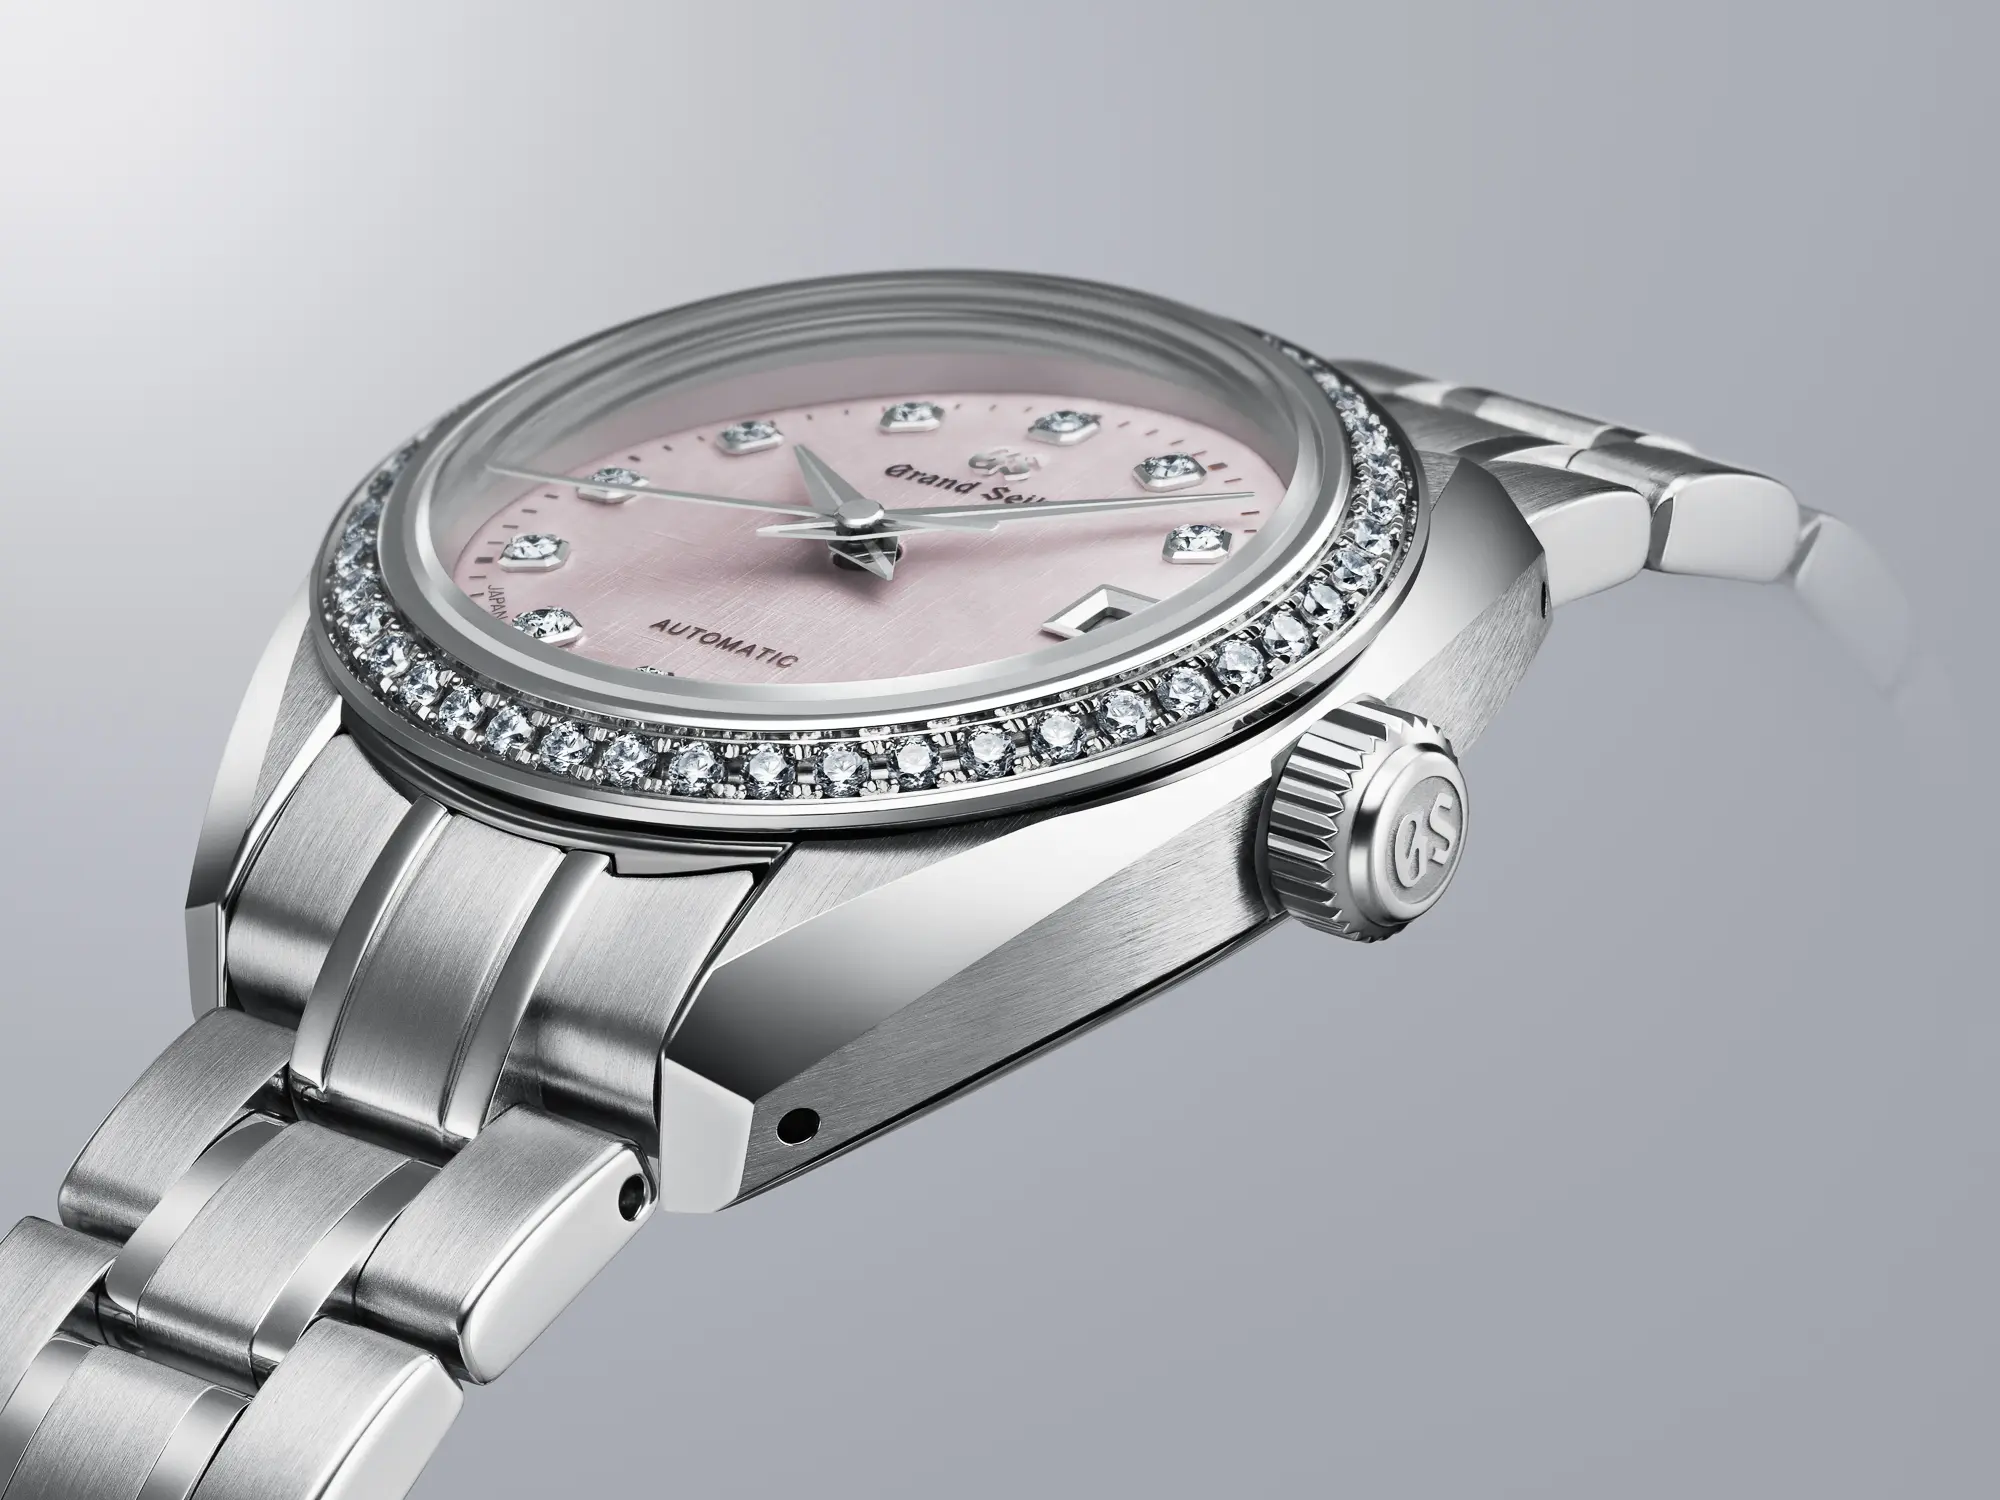 Grand Seiko STGK019 ladies watch with pink dial.